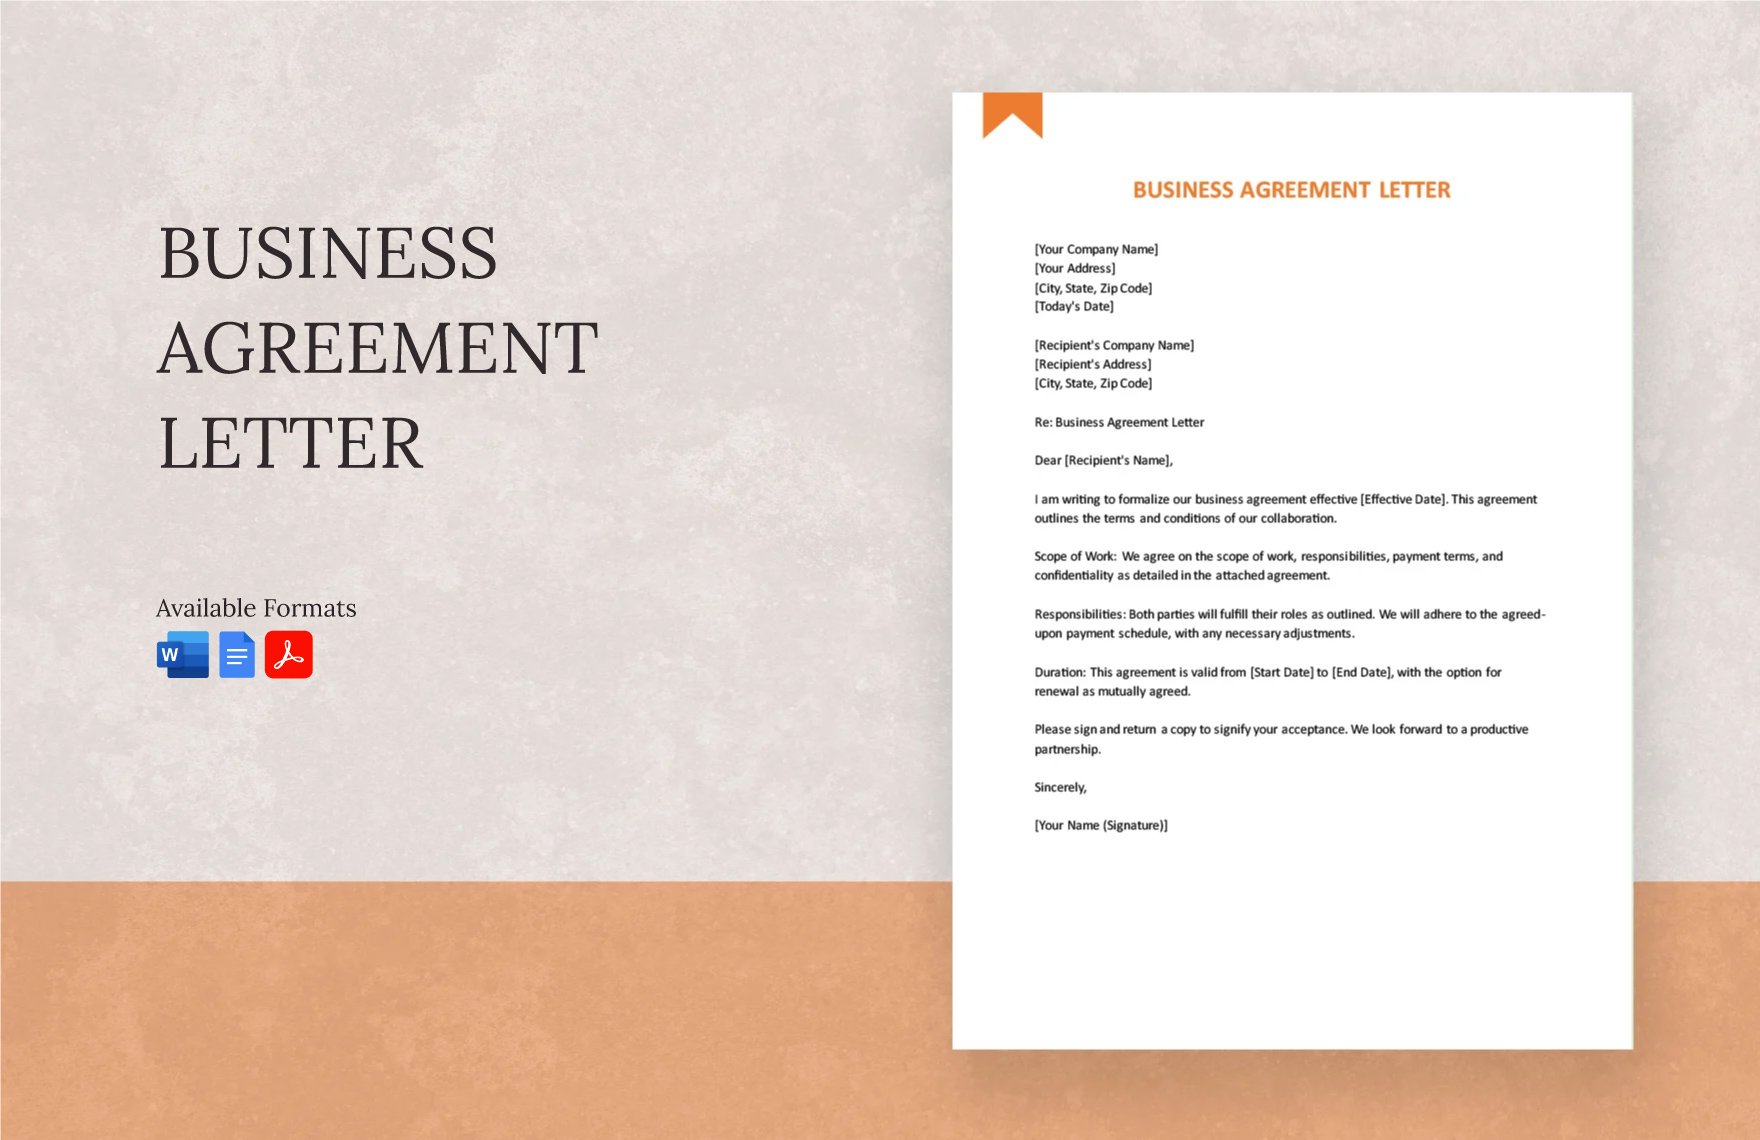 Business Agreement Letter in Word, Google Docs, PDF